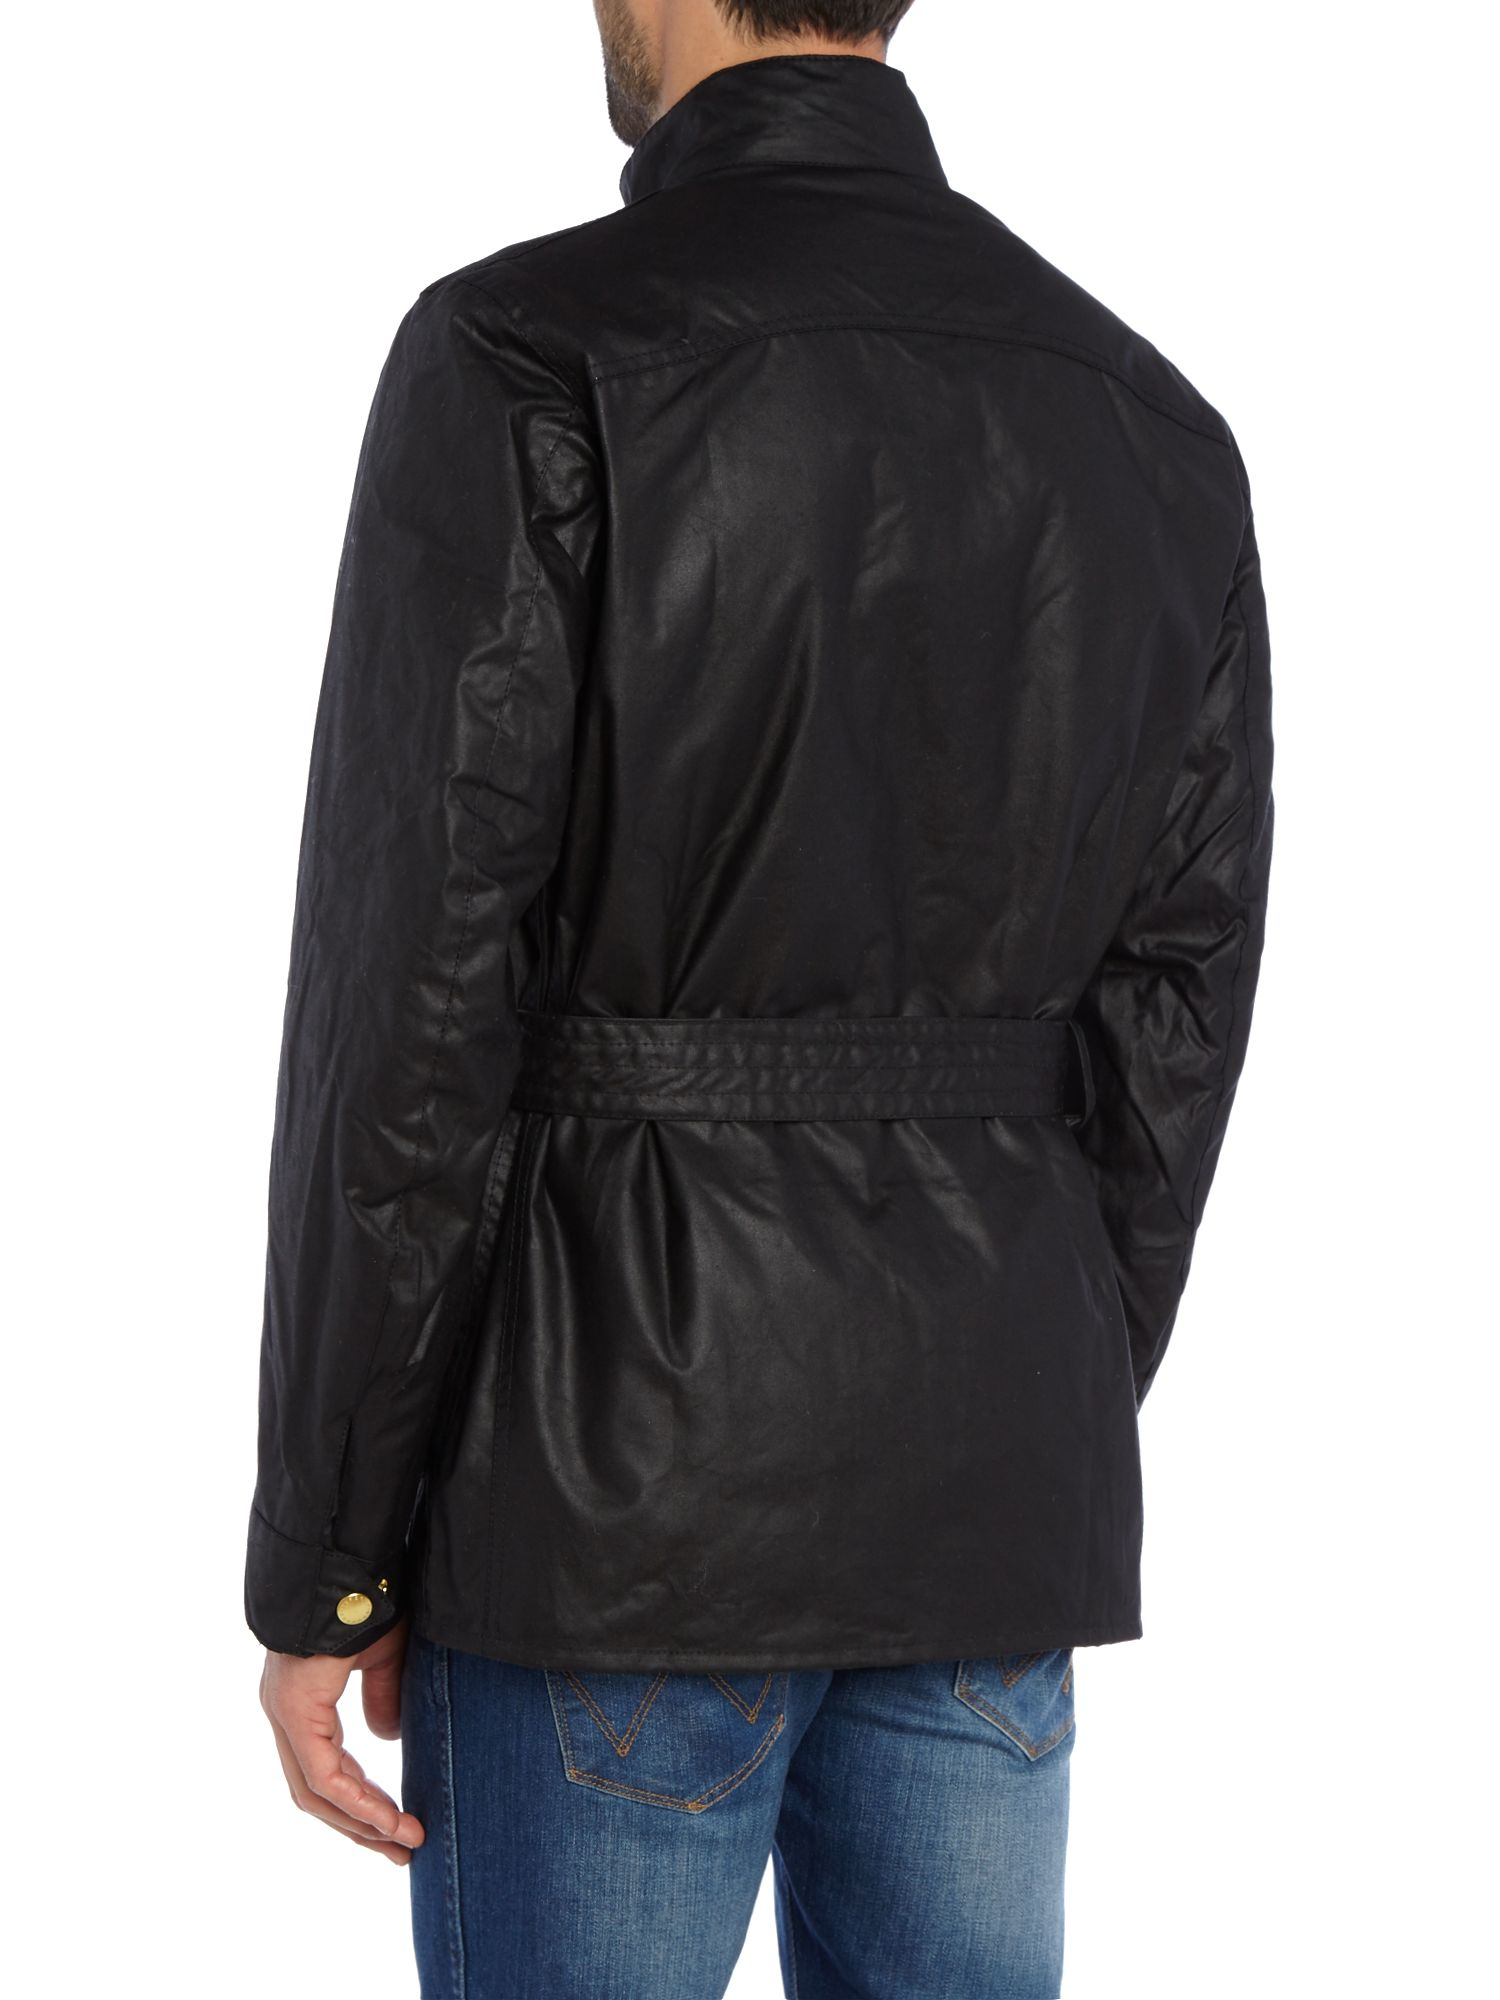 Barbour Union Jack Lined Motorcycle Jacket in Black for Men - Lyst